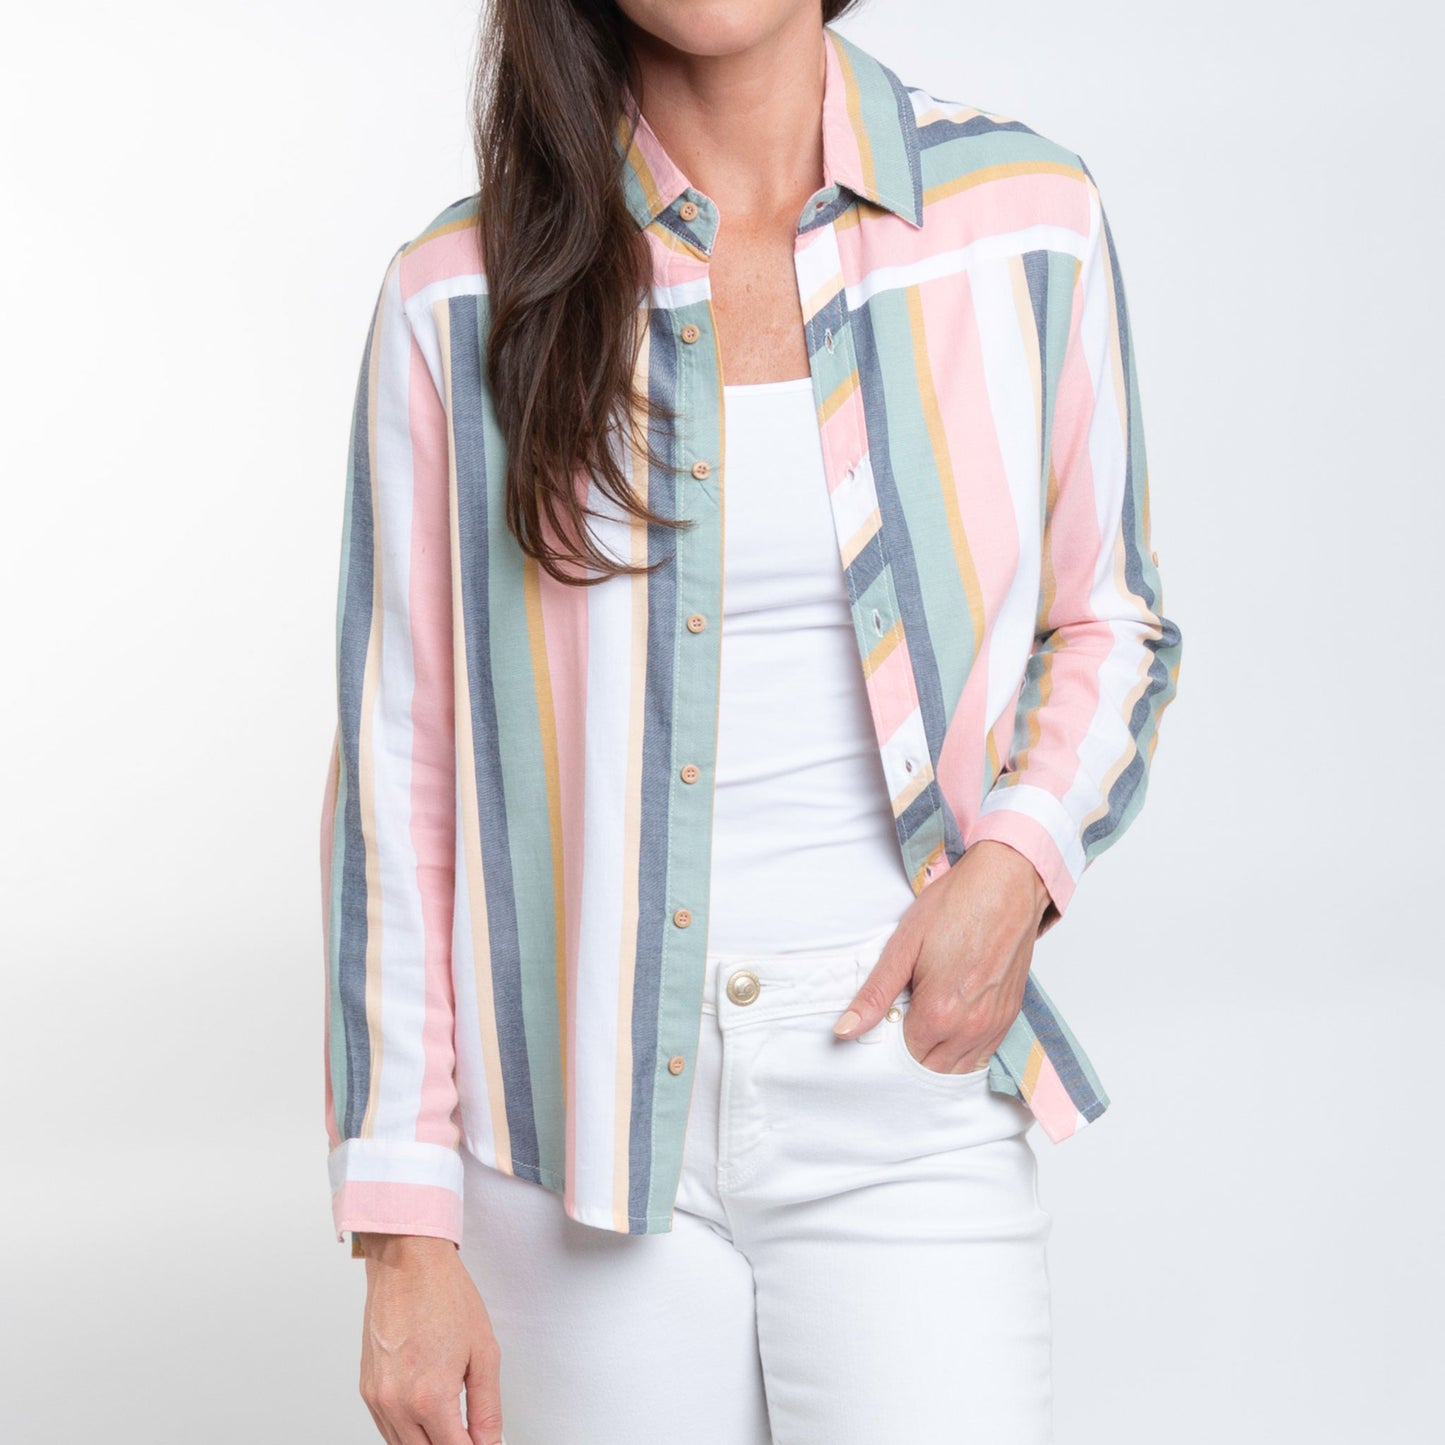 Sayla Long Sleeve Striped Button Up Blouse